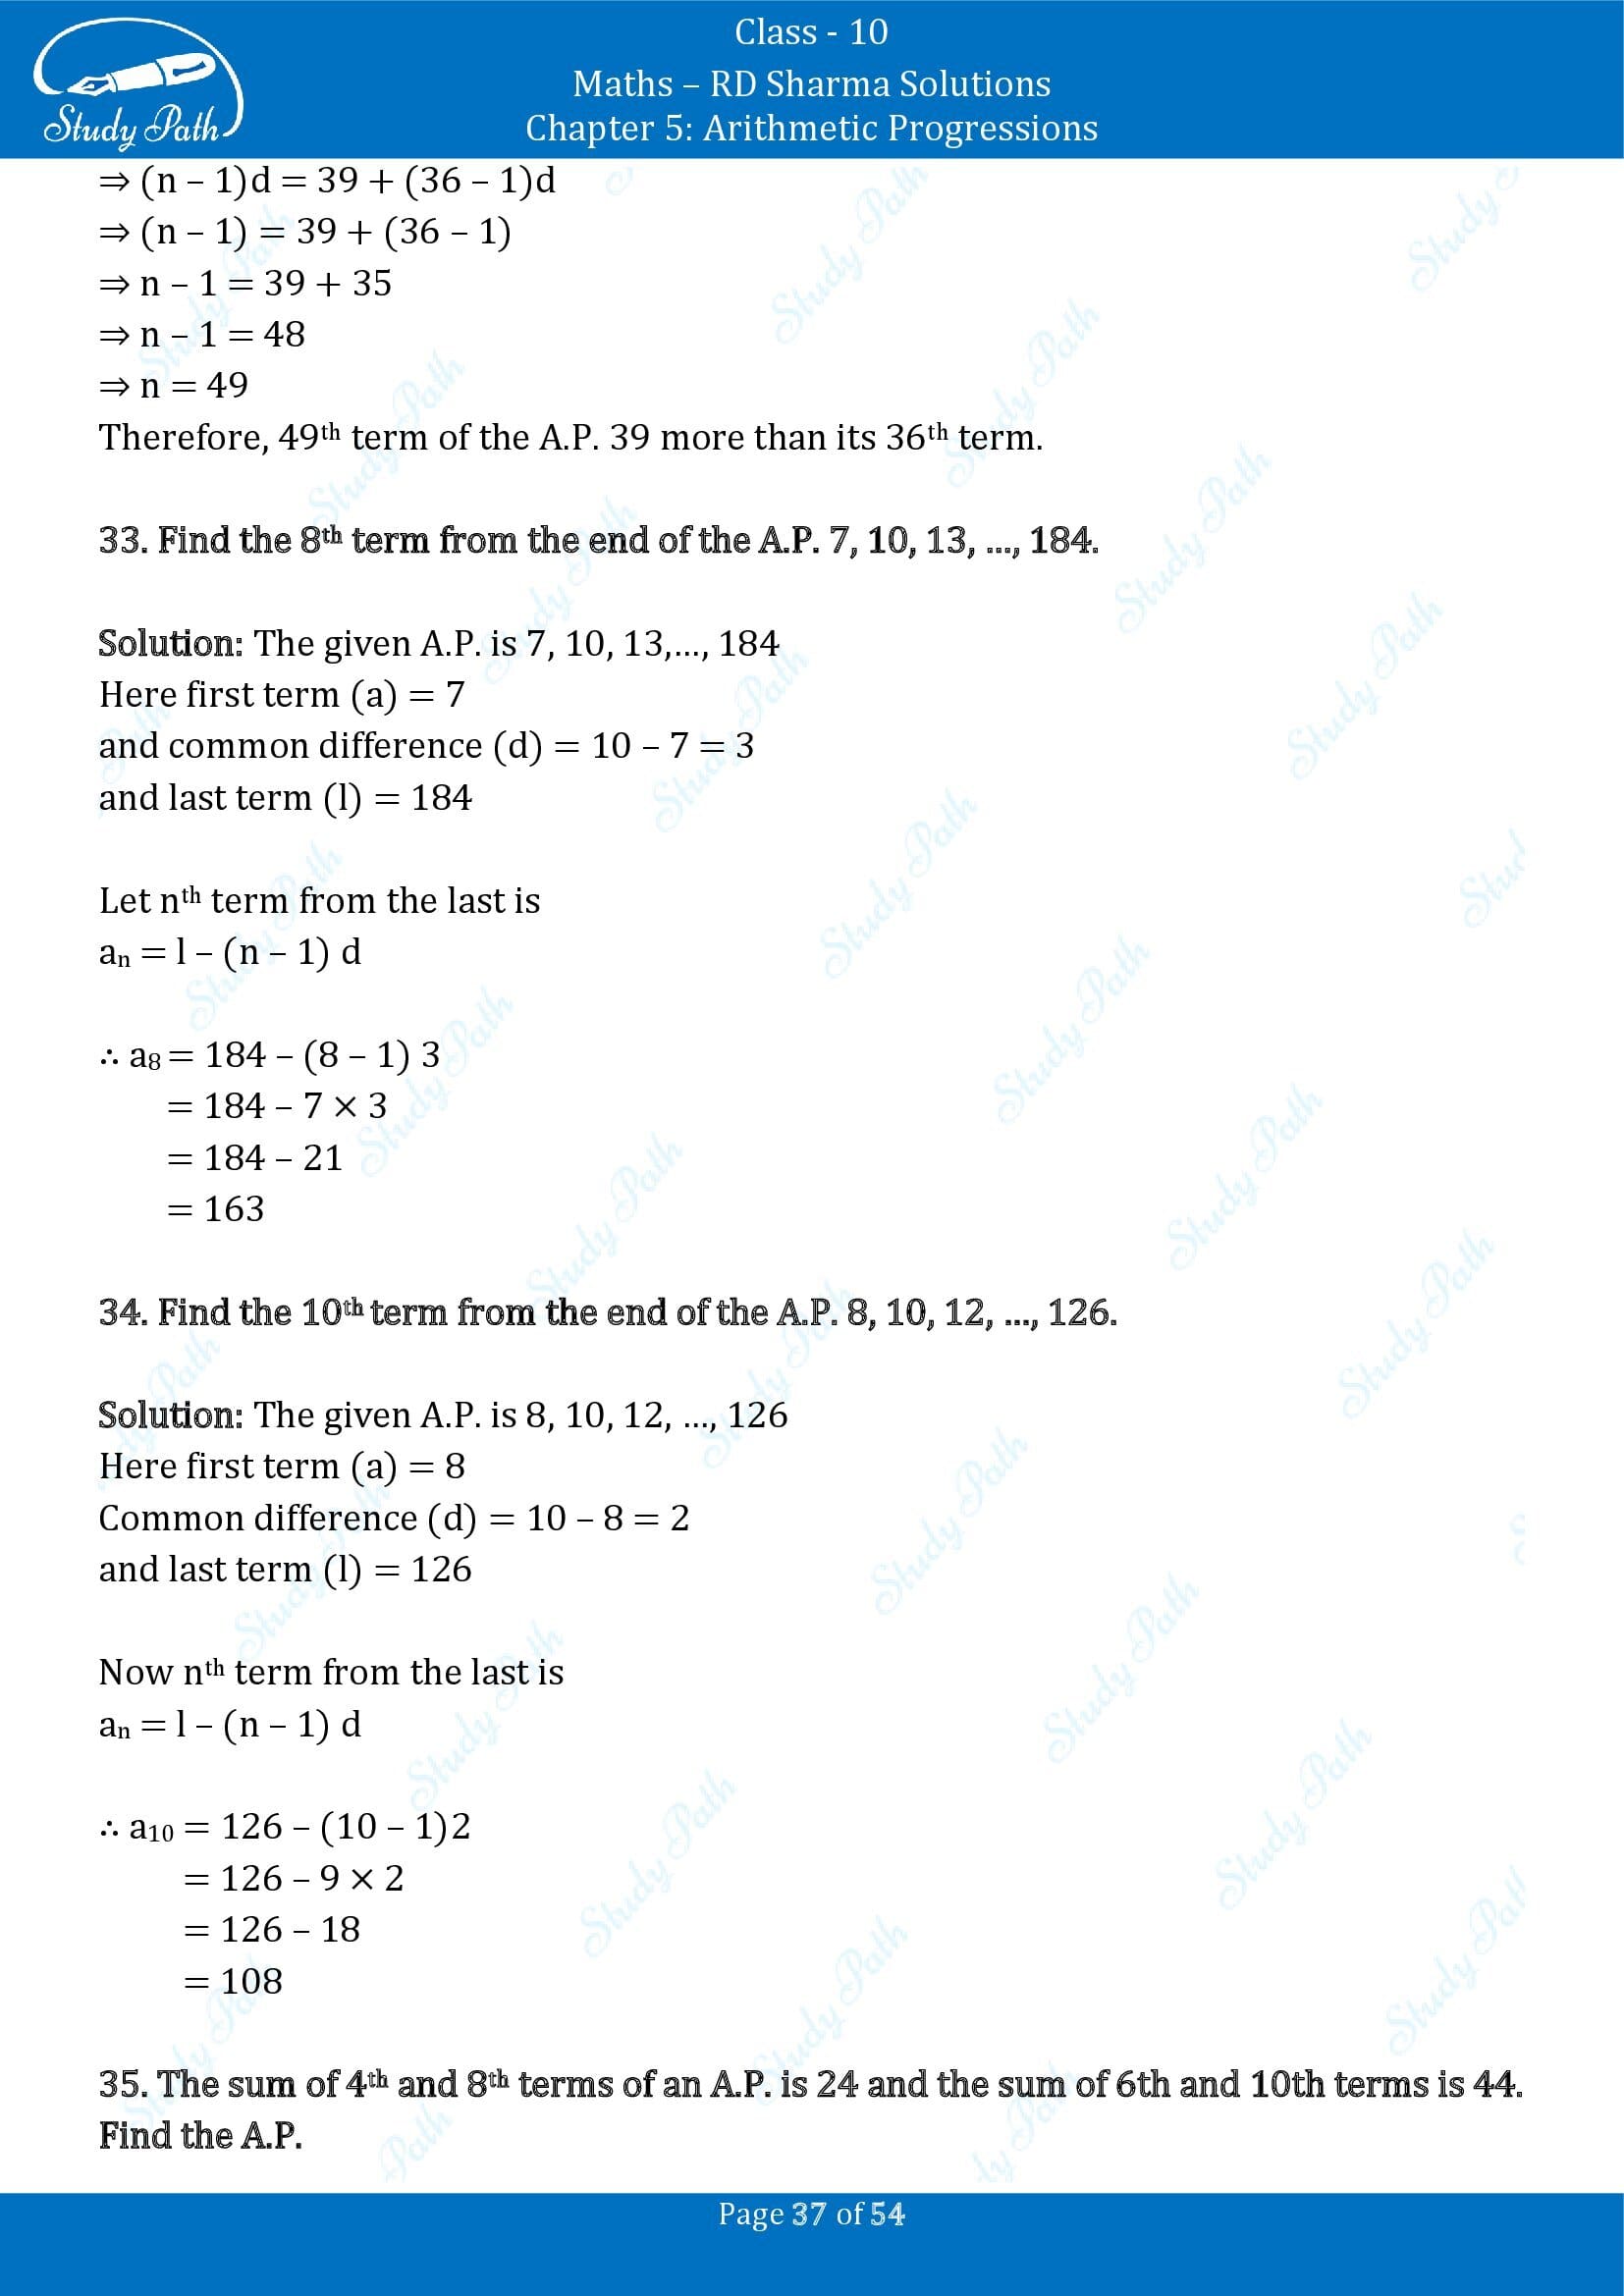 RD Sharma Solutions Class 10 Chapter 5 Arithmetic Progressions Exercise 5.4 00037